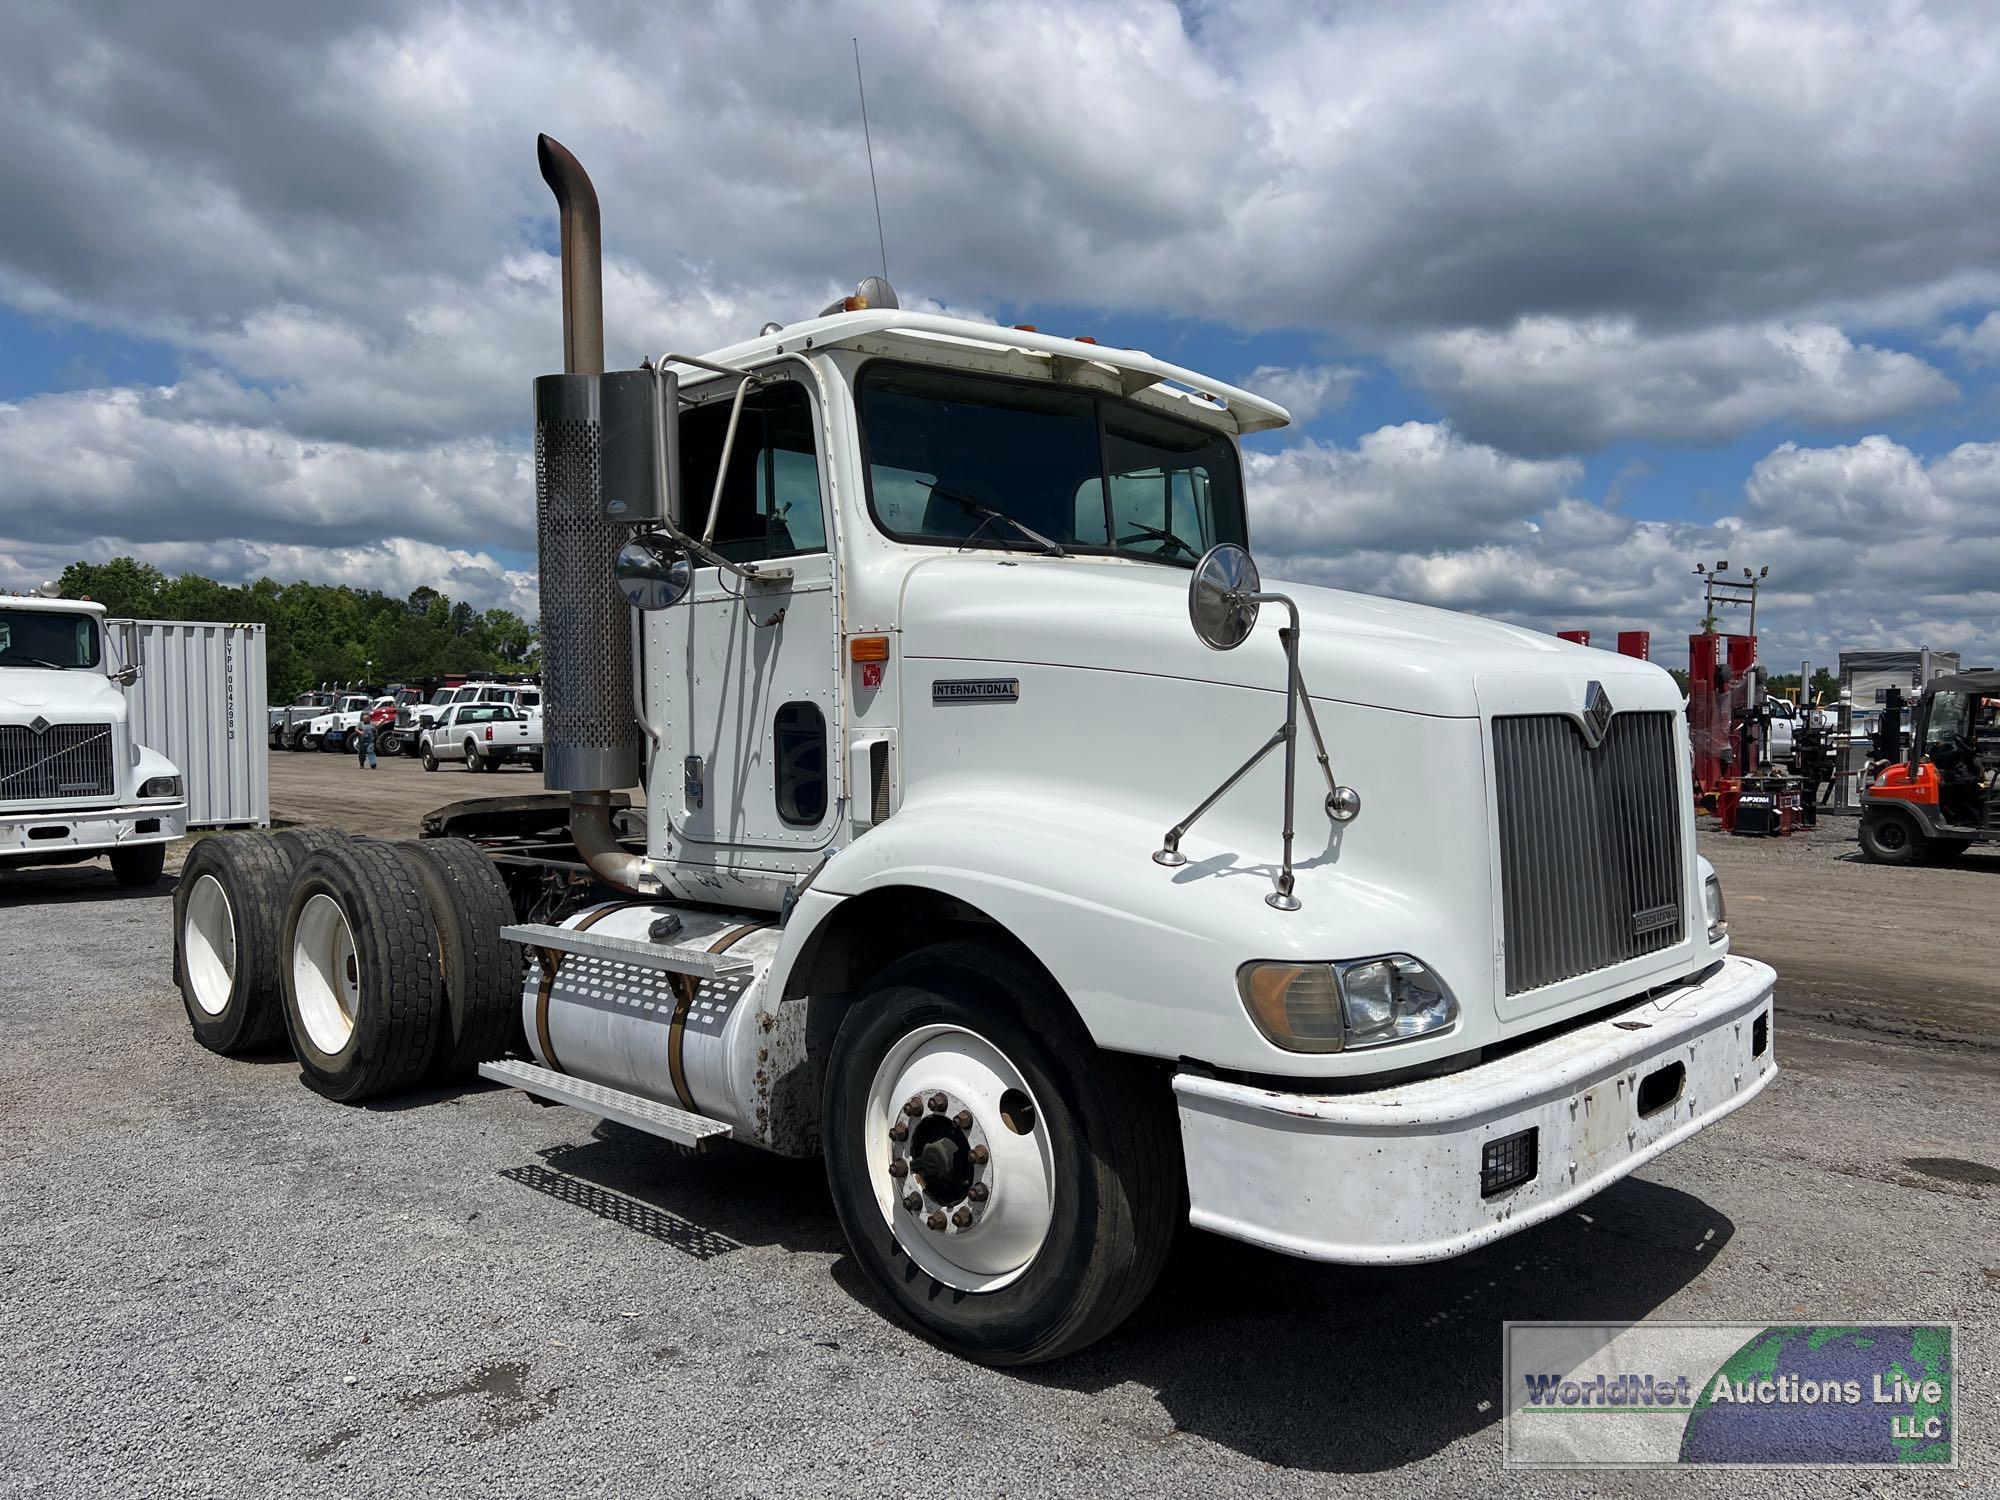 1997 INTERNATIONAL 9200 DAY CAB ROAD TRACTOR, VIN # 2HSFMAMR5VC031555